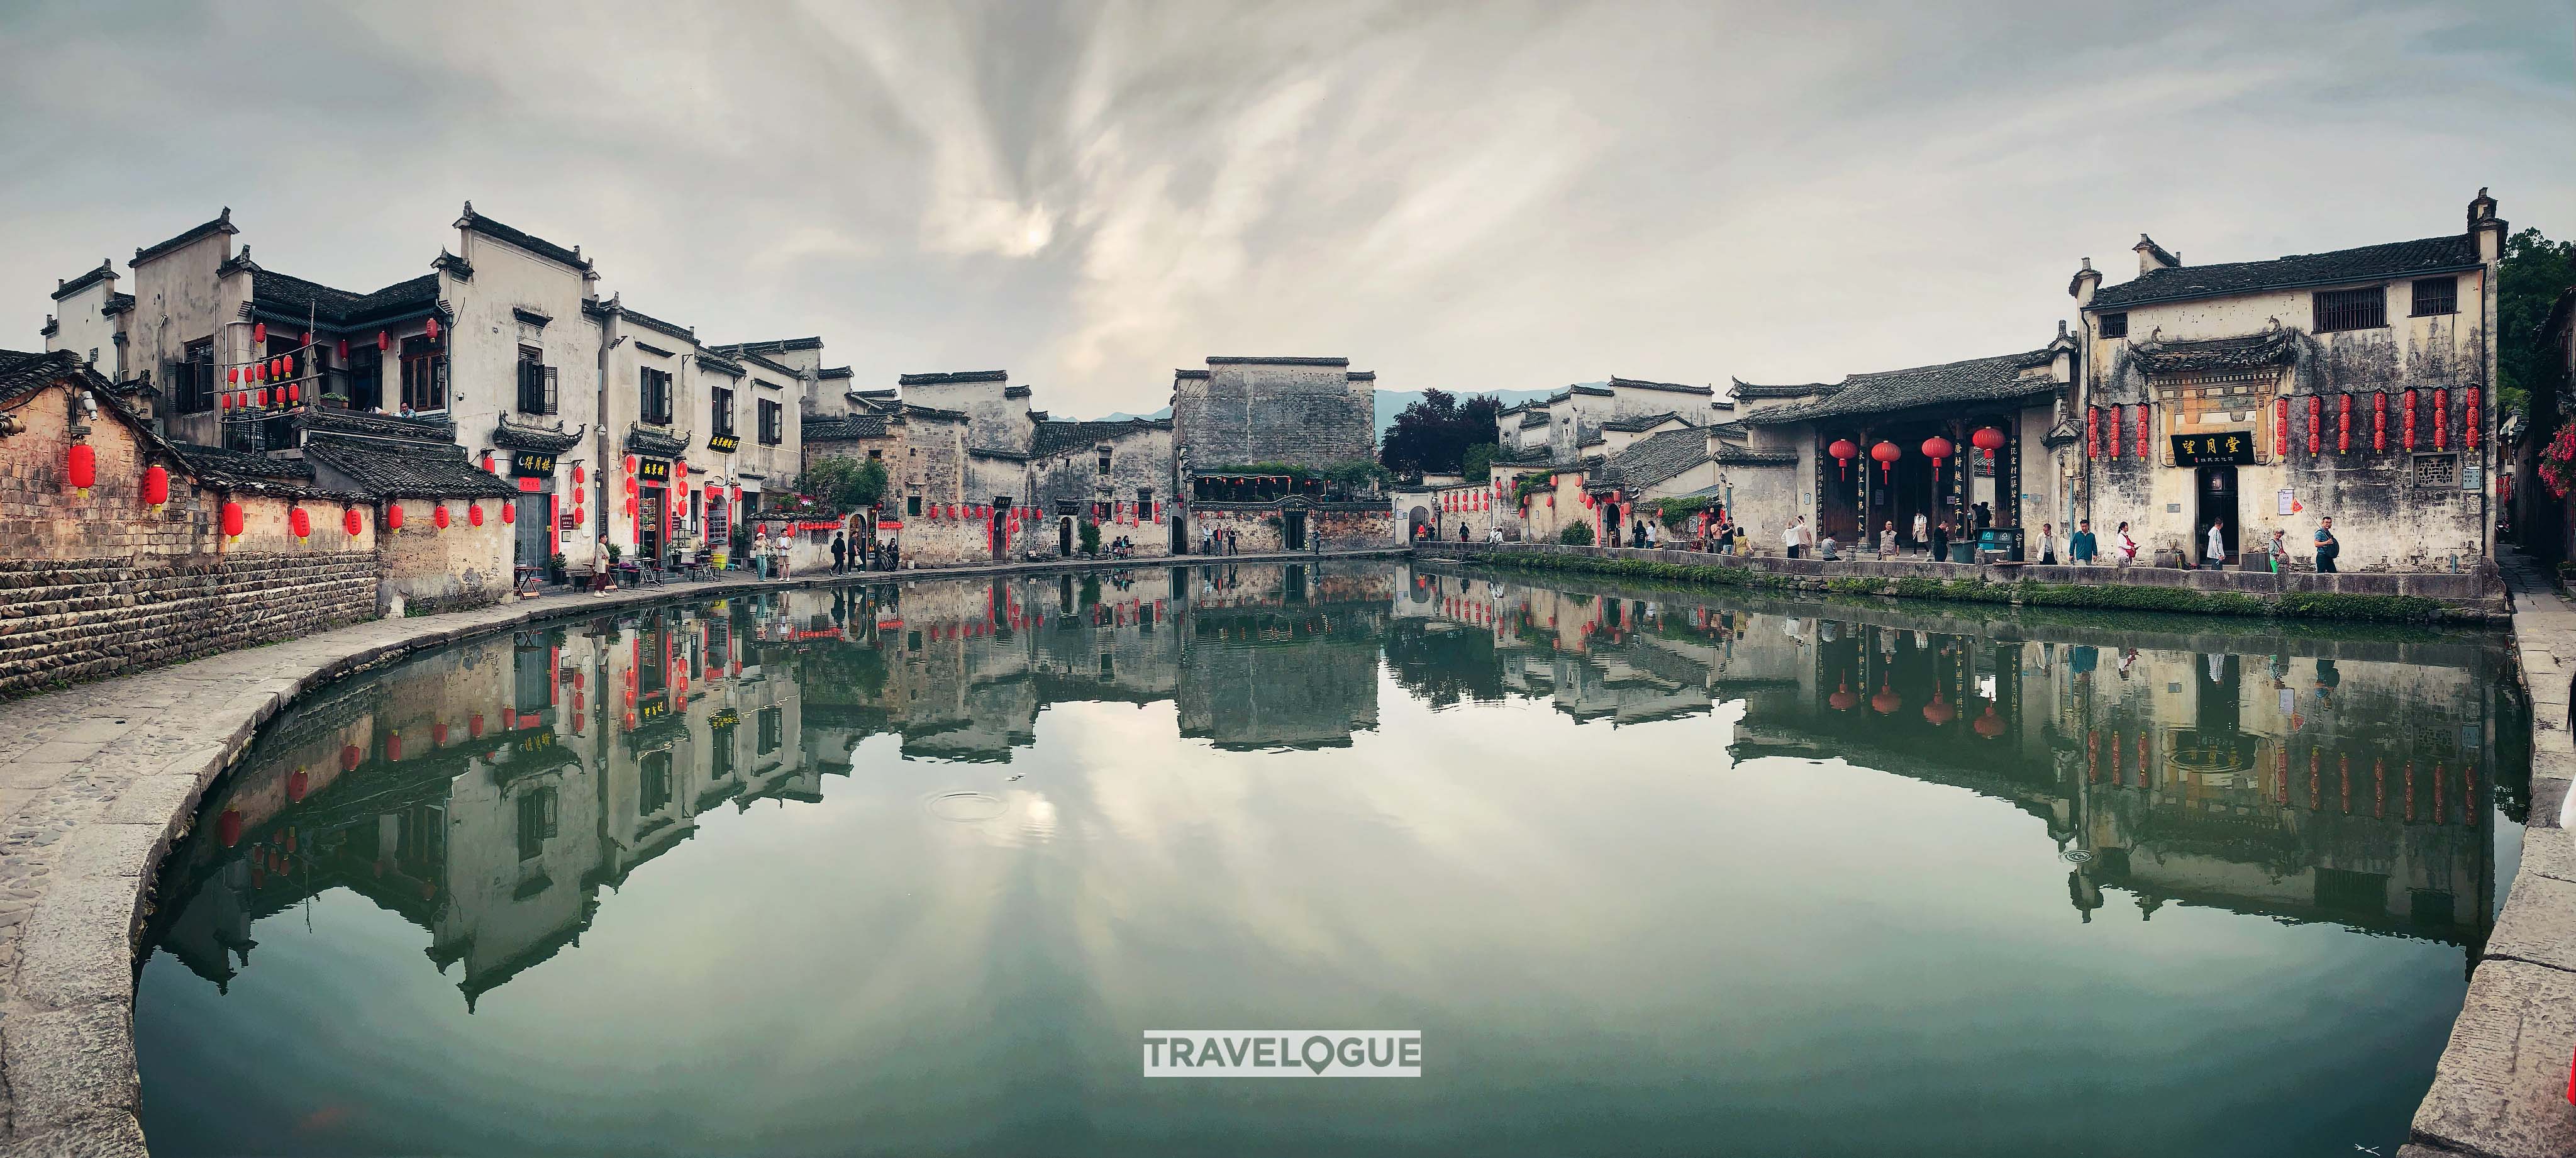 An unobstructed view of Hongcun Village, east China's Anhui Province. /CGTN